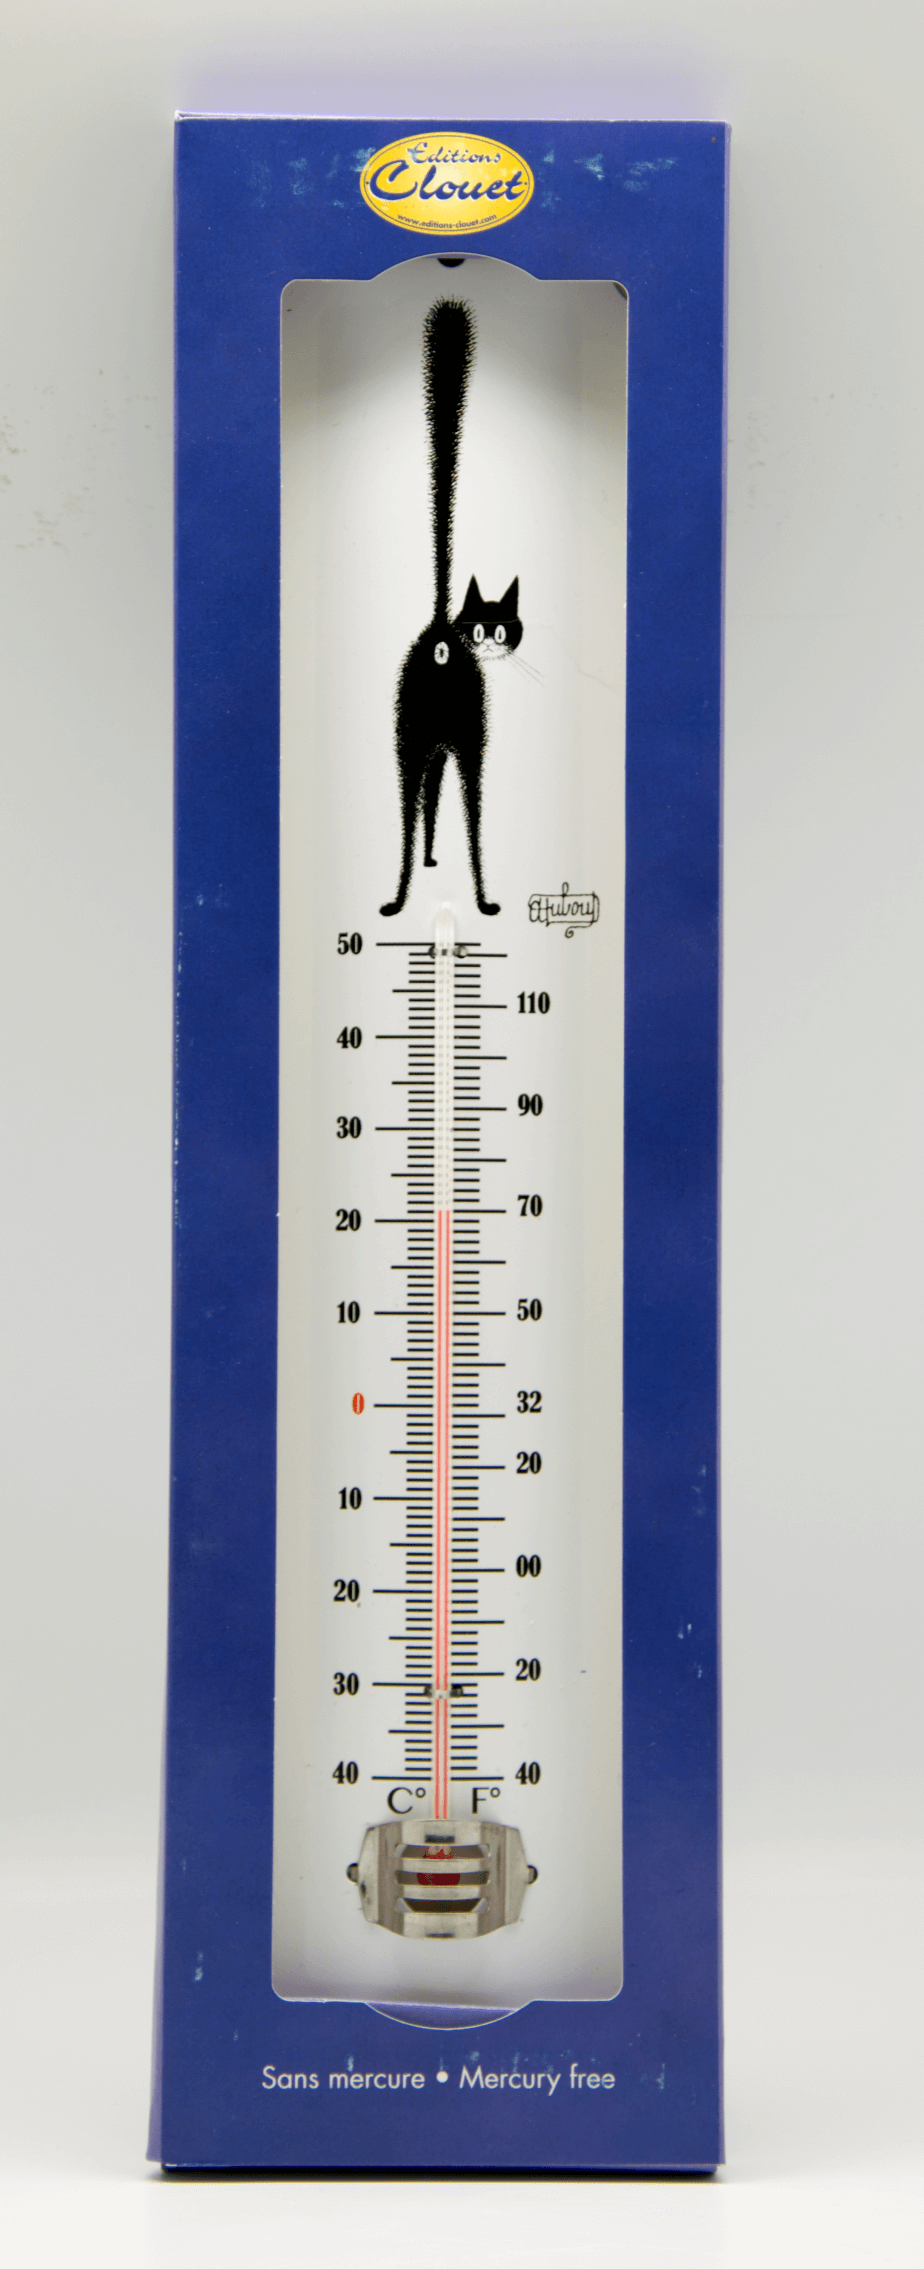 Dubout Cats - The Third Eye Garden Thermometer (3ieme Oeil)